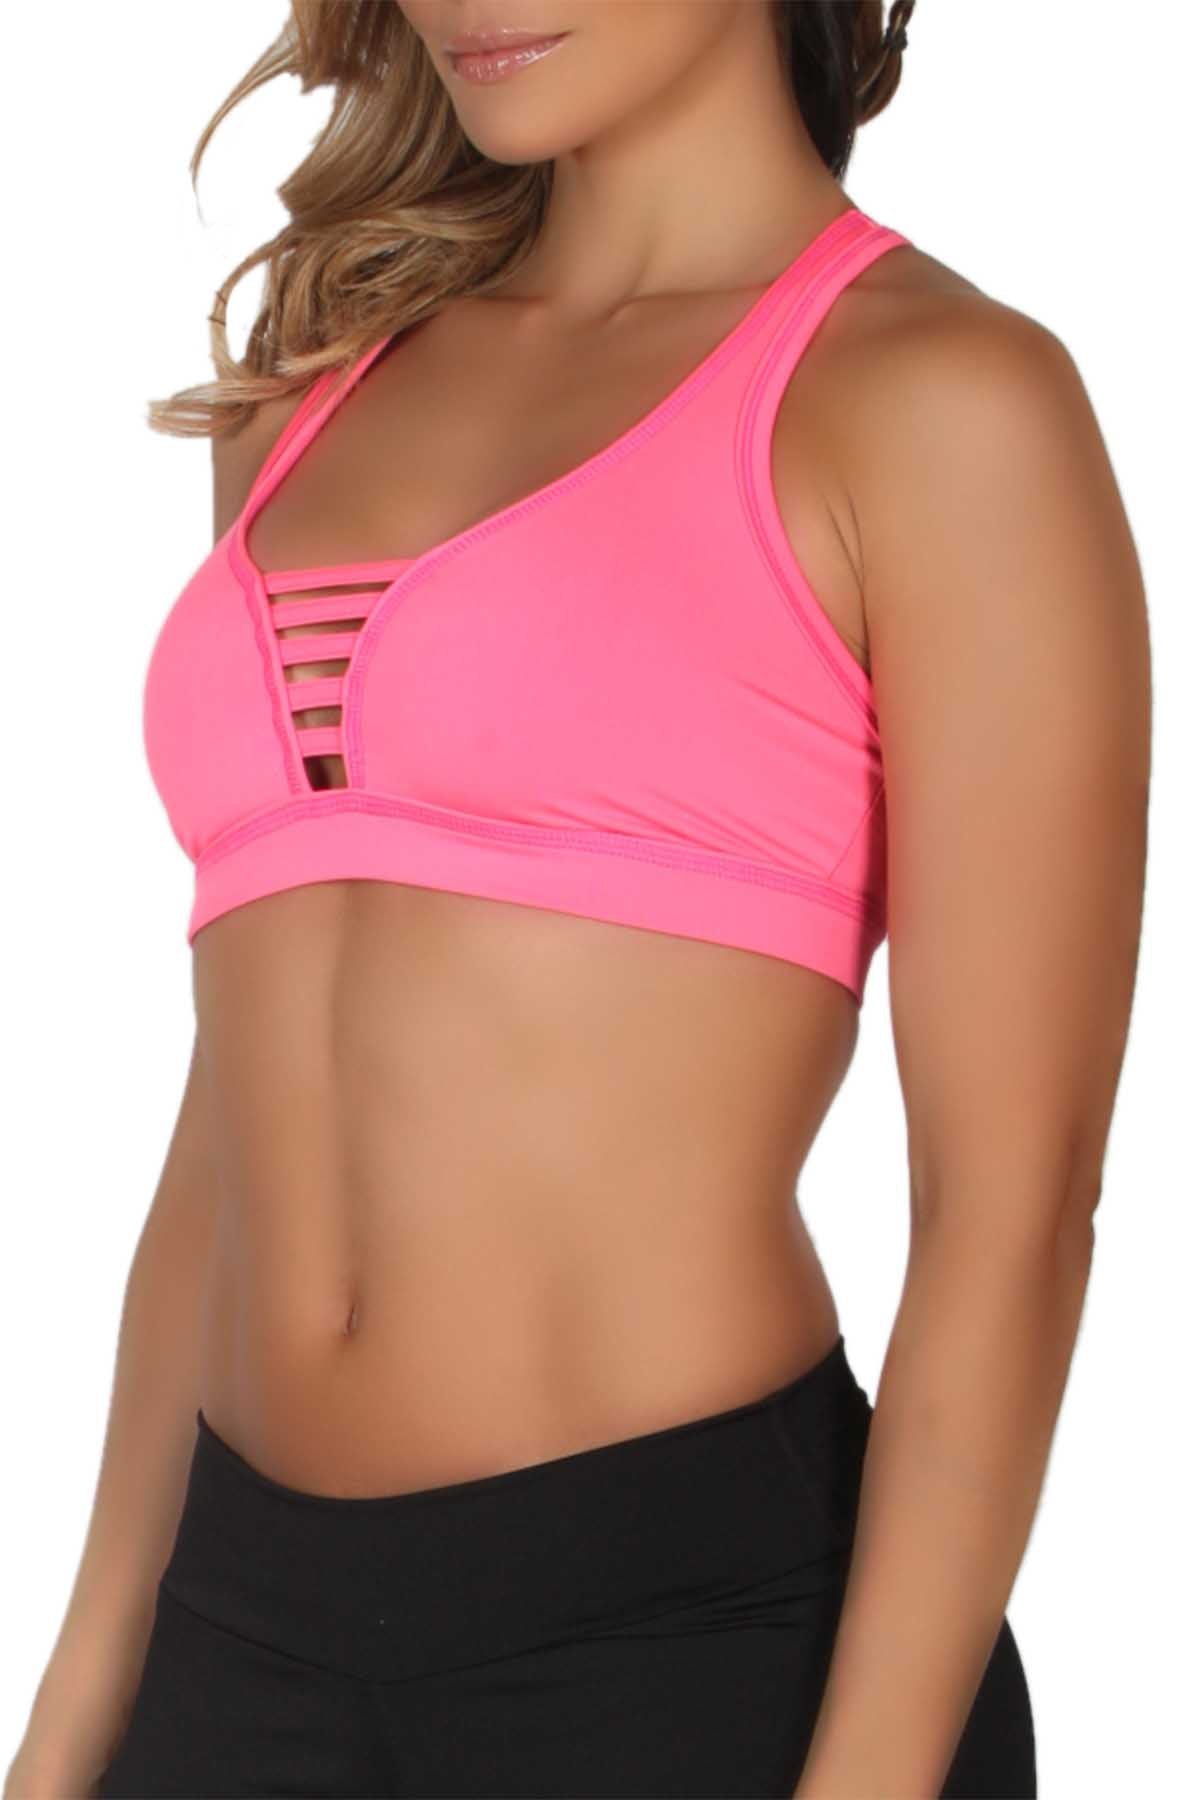 365me Pink Sports Top